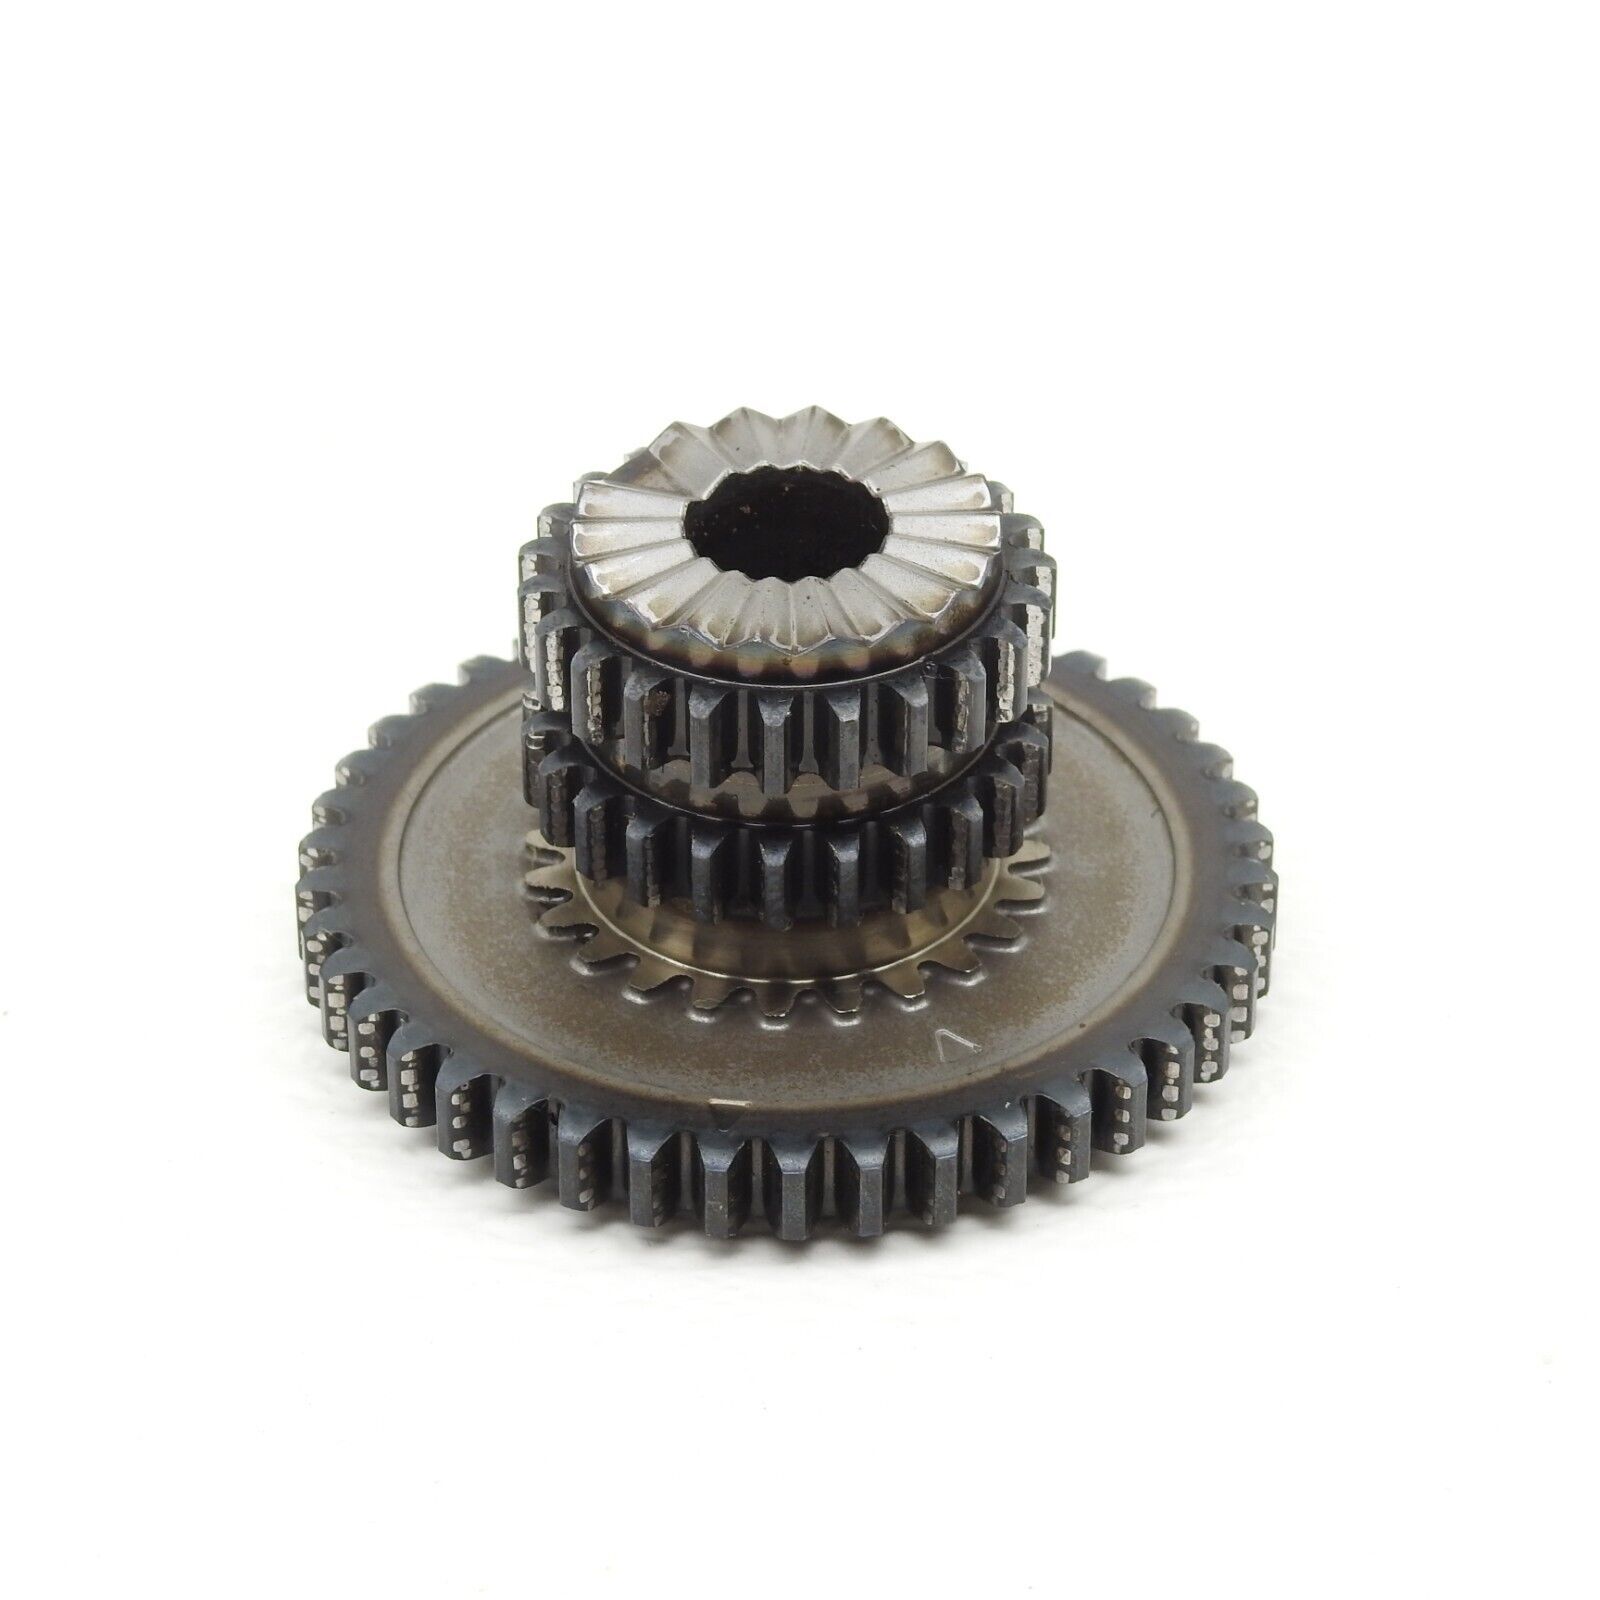 Primary image for 2010-2014 Mk6 Vw Gti 2.0T Engine Crankshaft Timing Gear 06H105209AT Factory -221